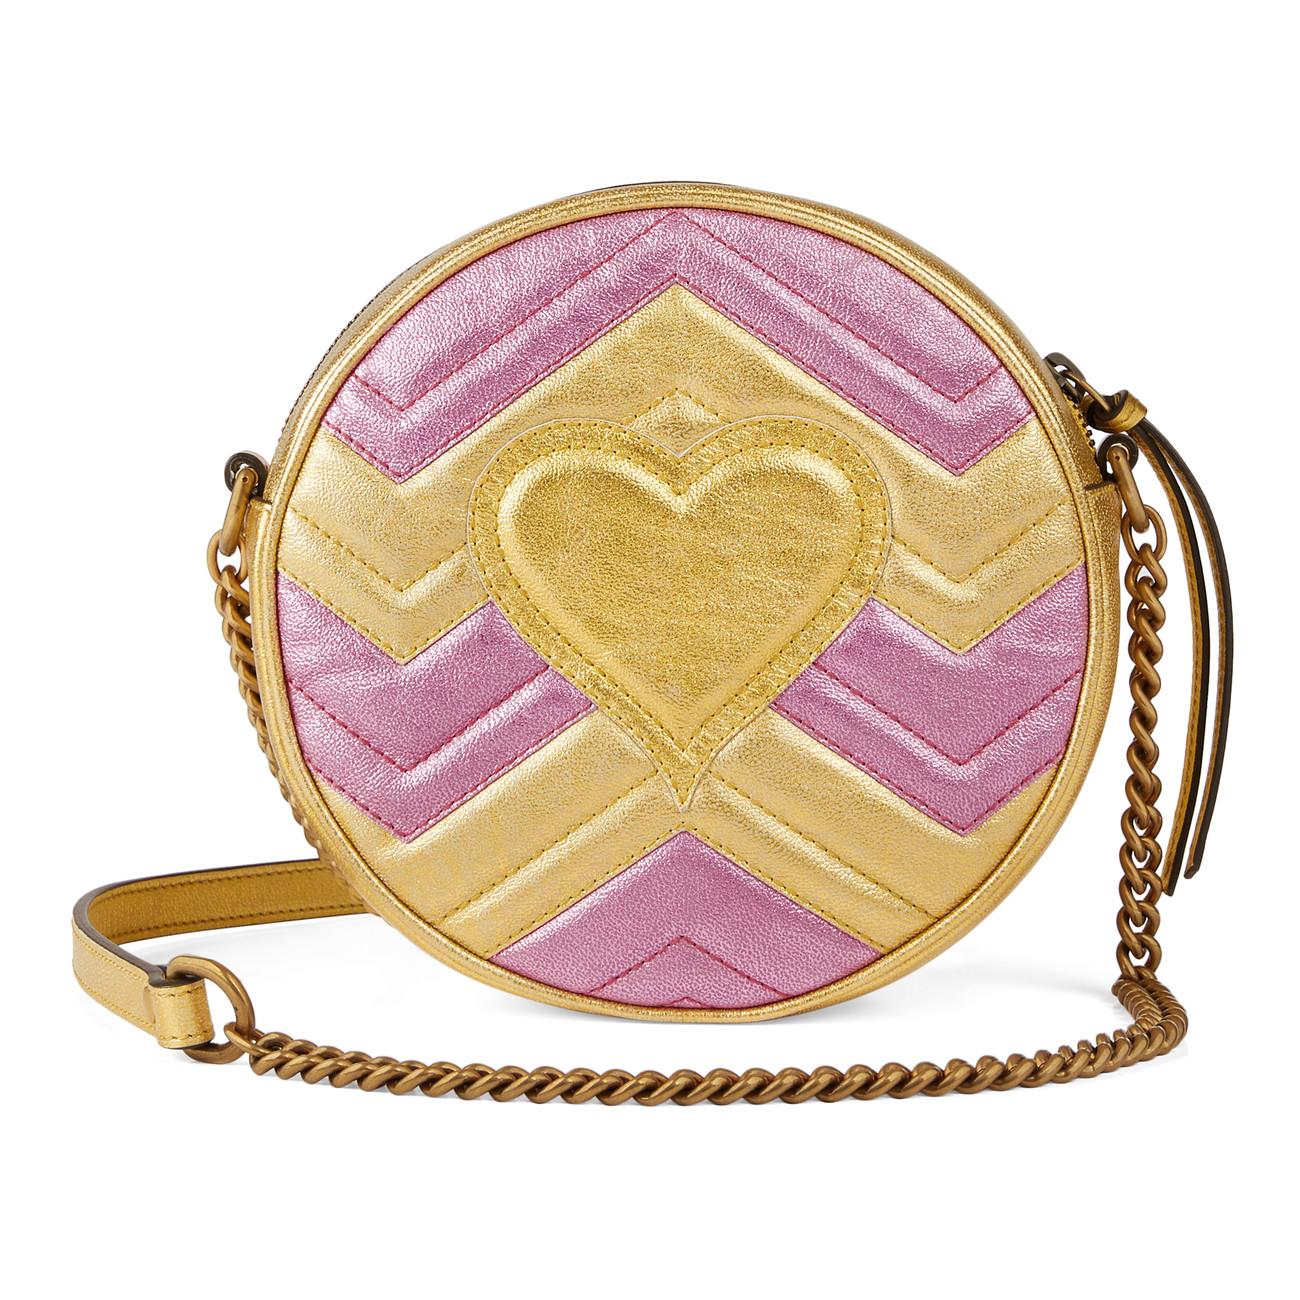 Lyst - Gucci Gg Marmont Mini Round Shoulder Bag in Pink